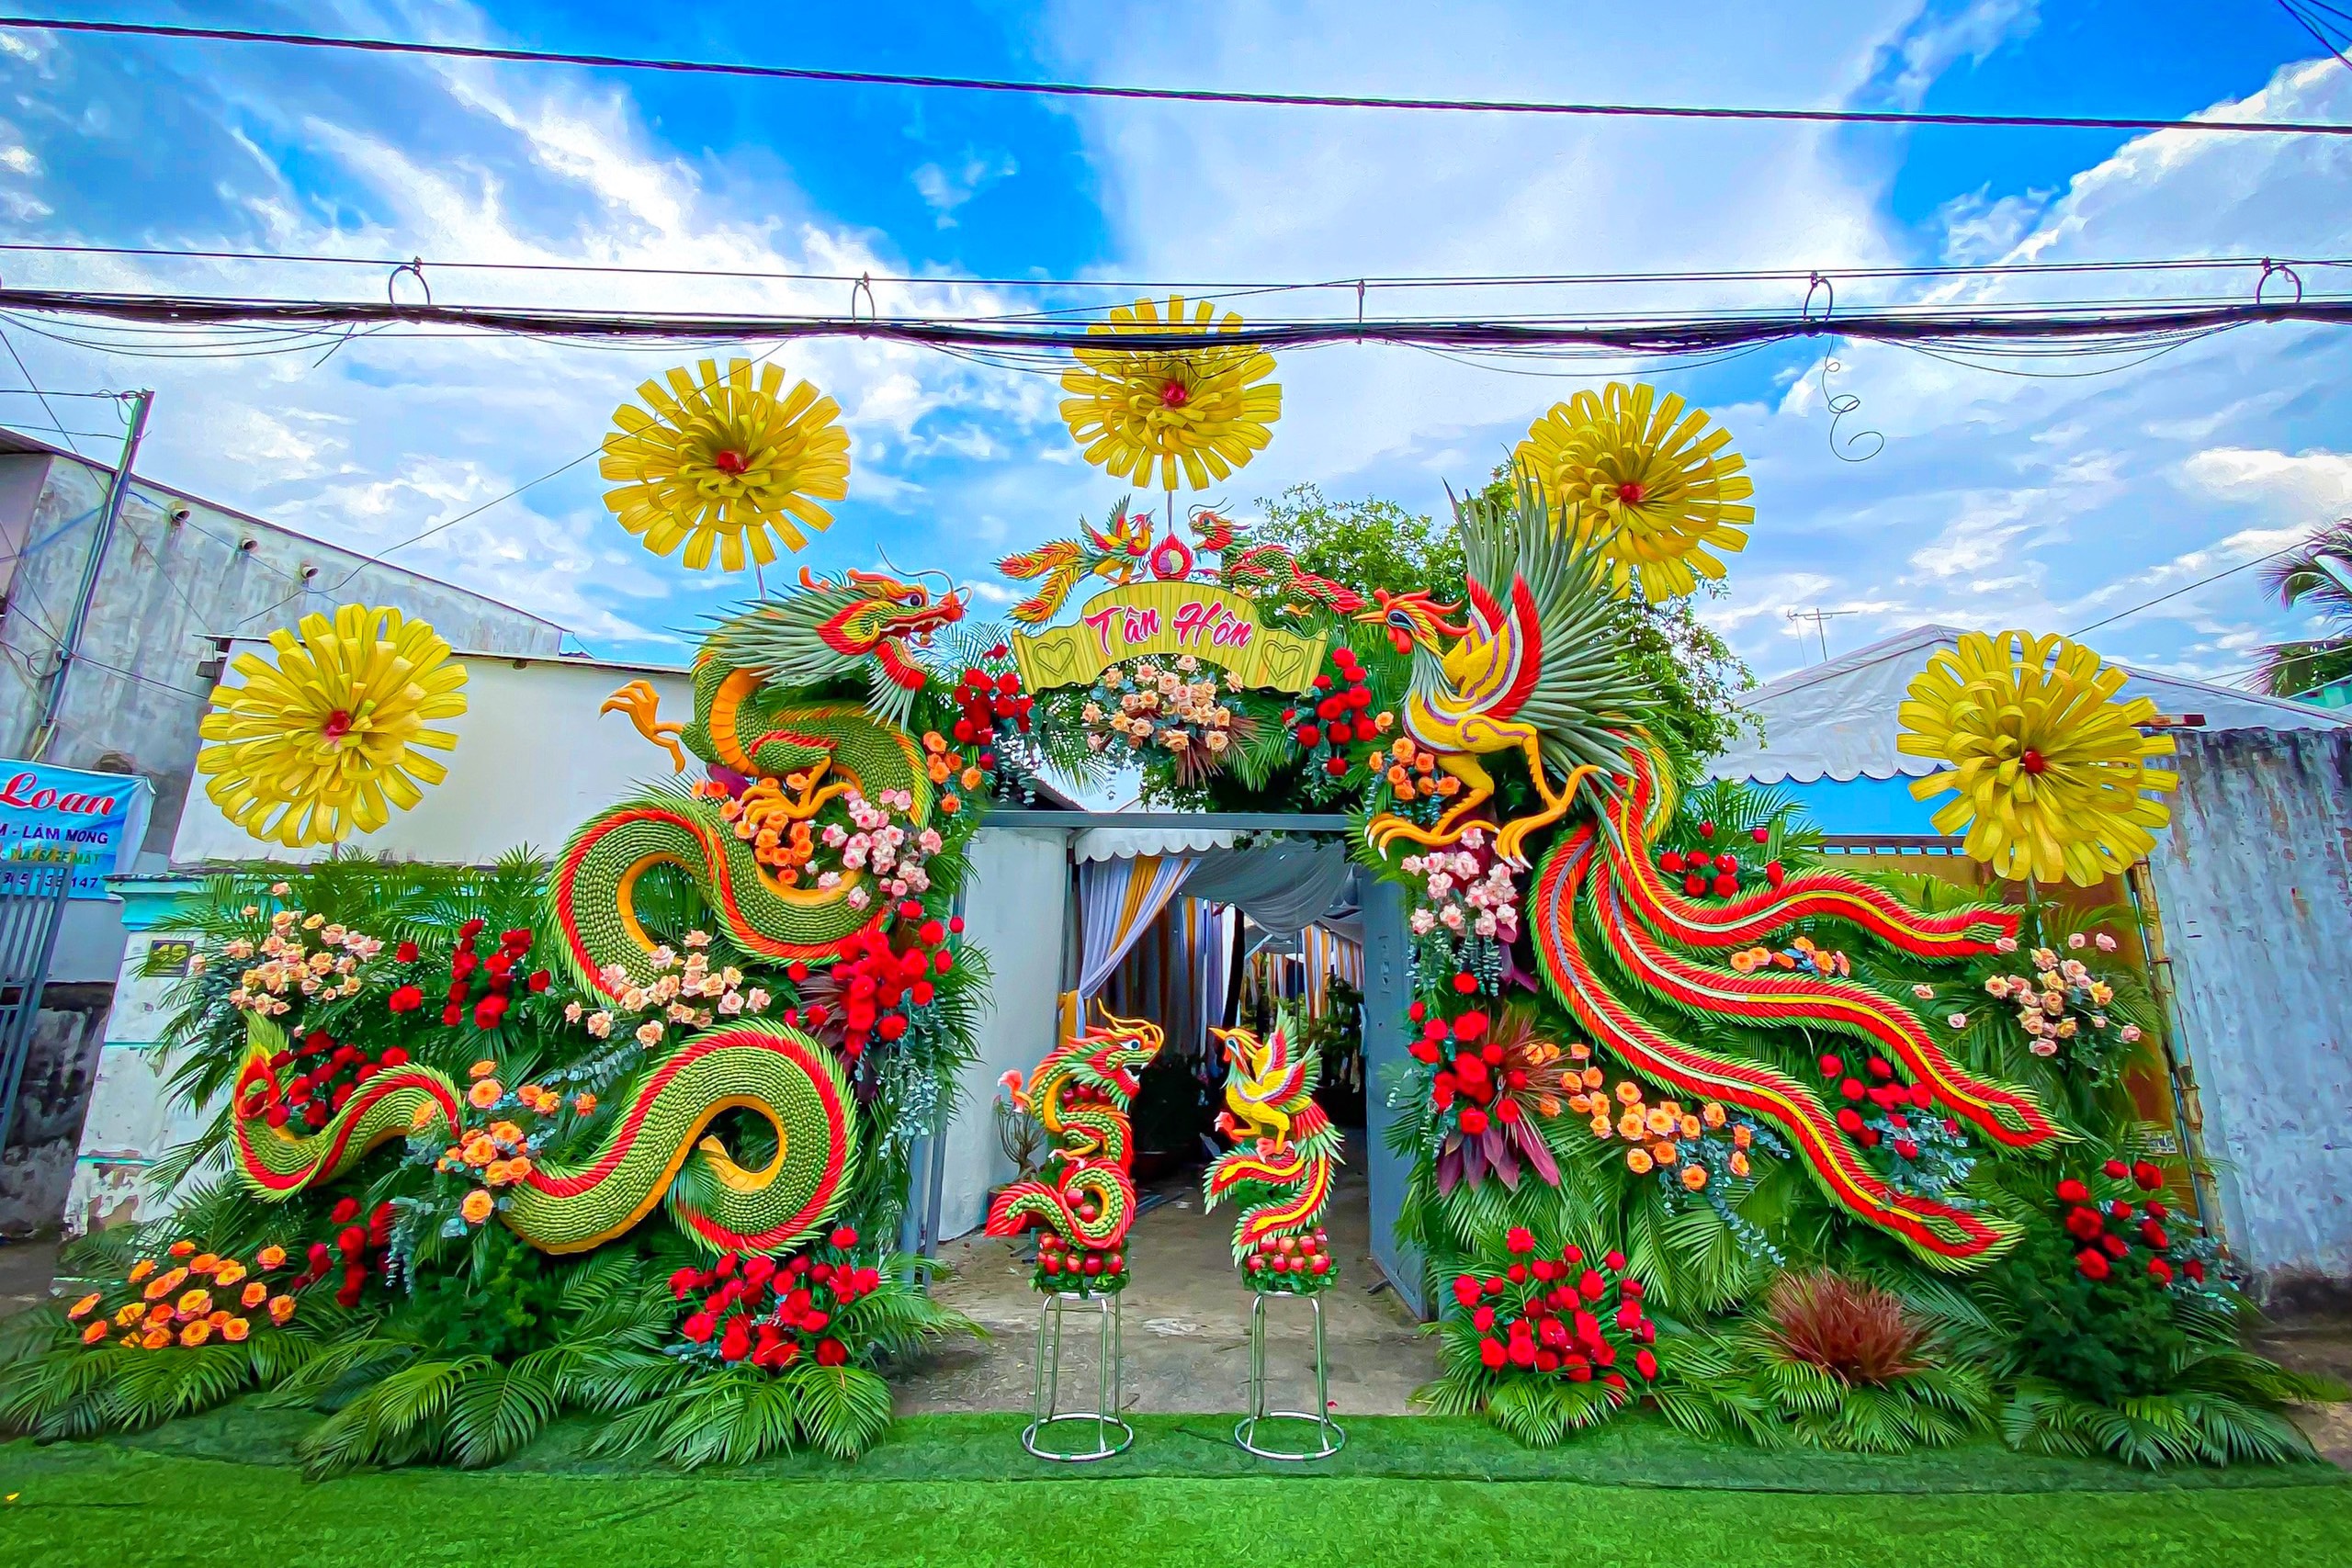 In southern Vietnam, couples favor massive wedding gates made from veggies